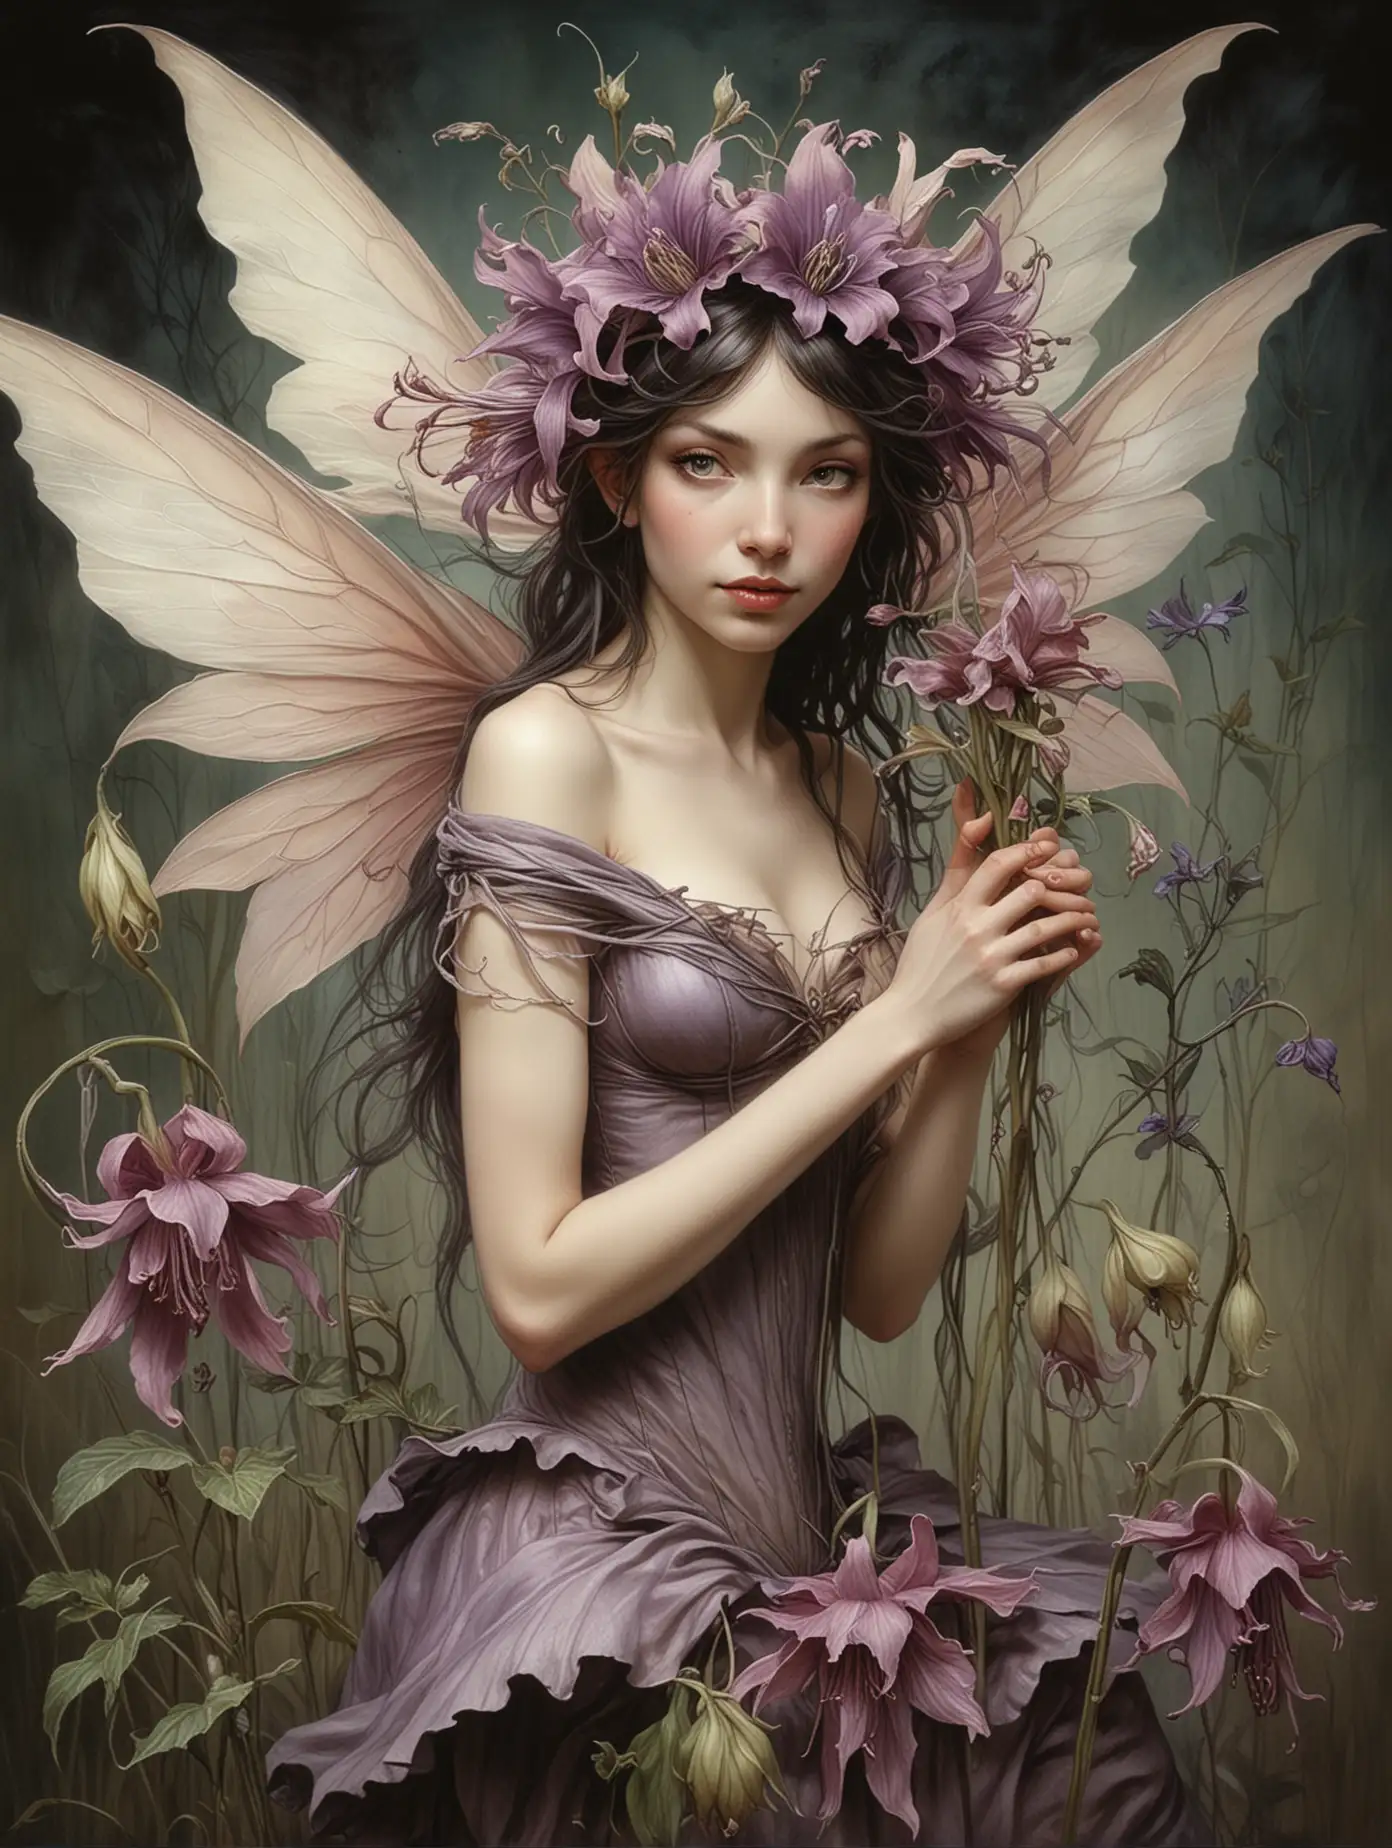 HyperRealistic Flower Fairy Belladonna A Fusion of Cicely Mary Barker and Brian Frouds Art Styles